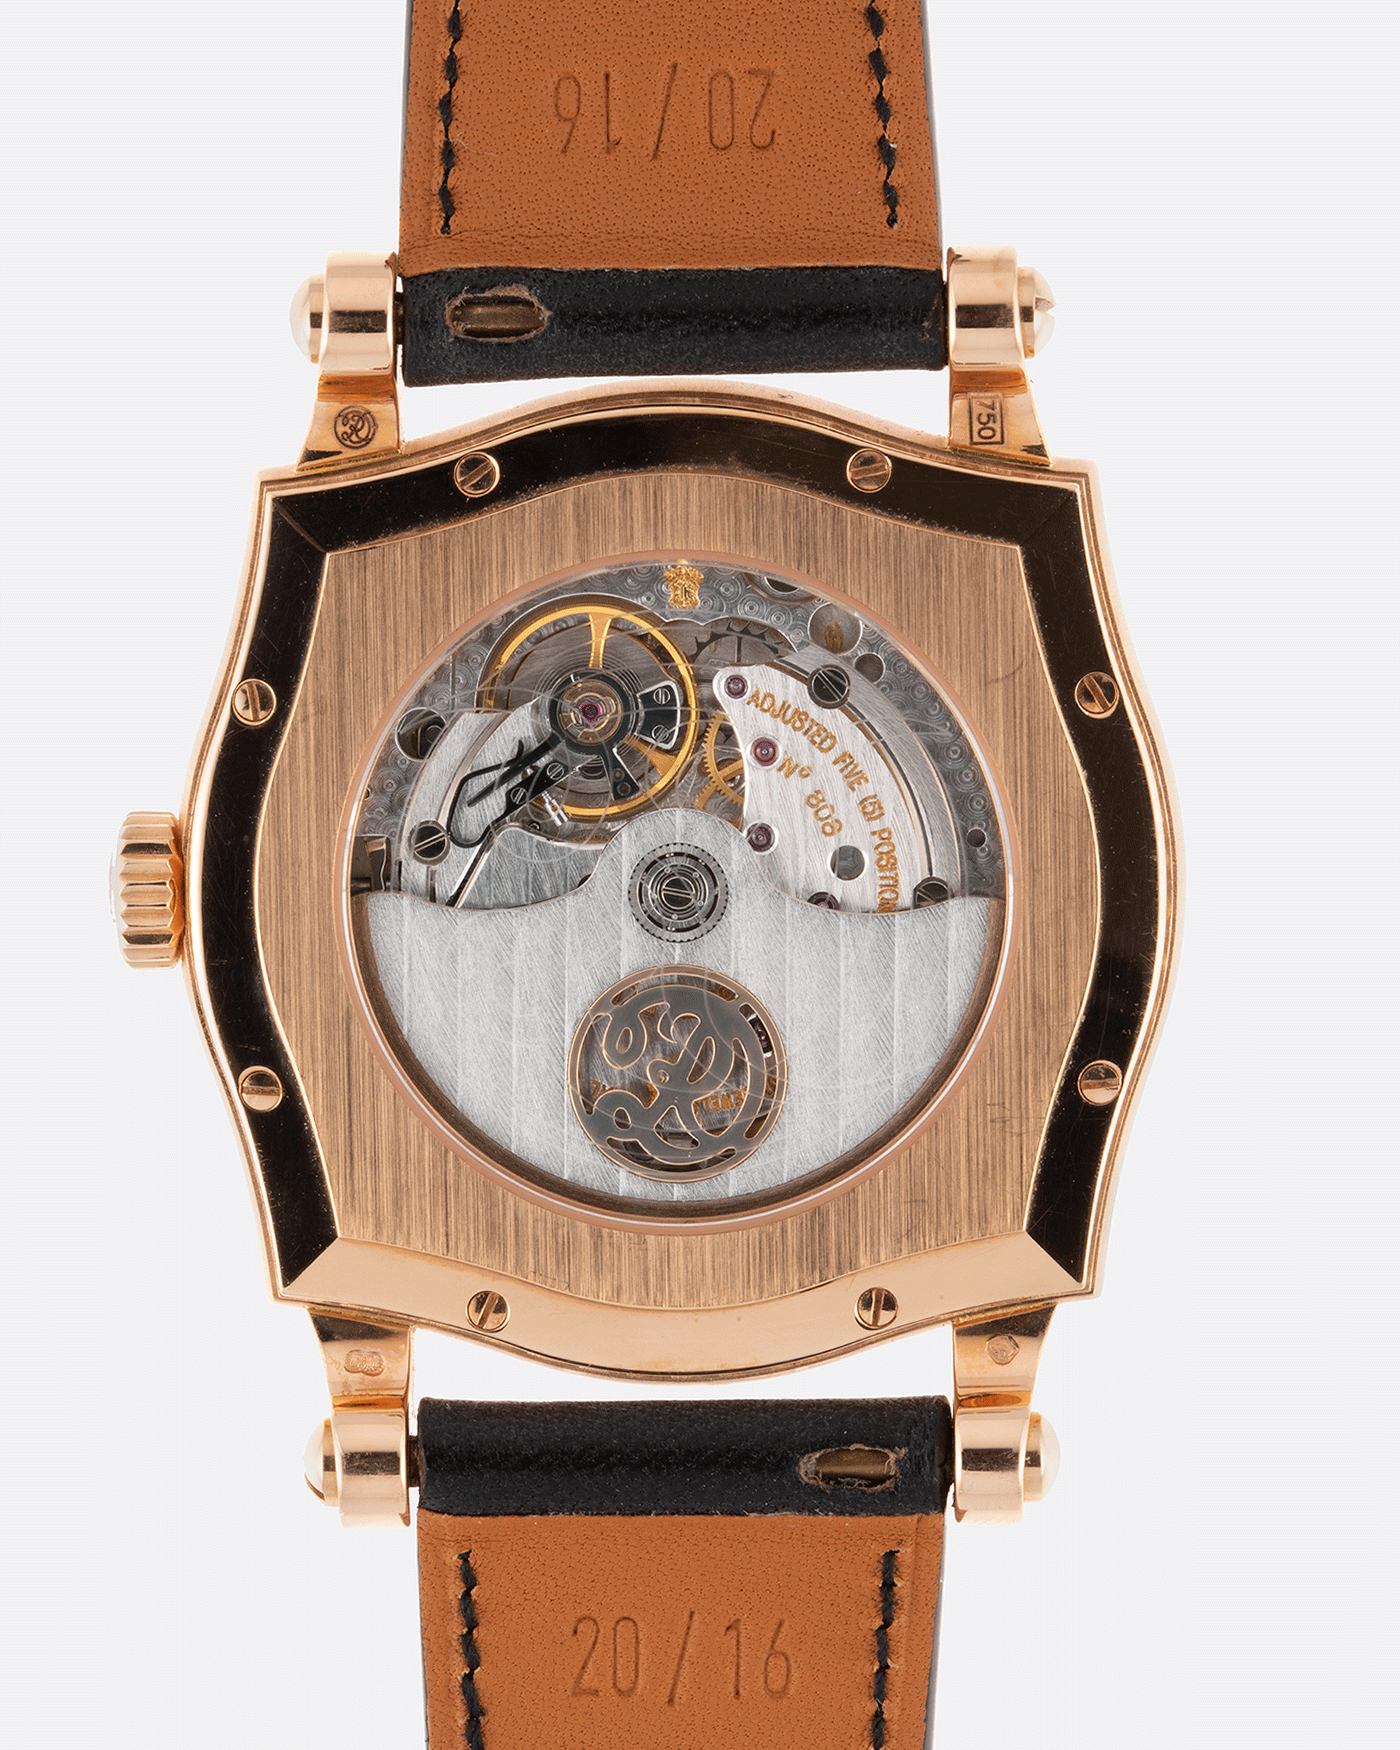 Brand: Roger Dubuis Year: 2000’s Model: Sympathie 37 Material: 18k Yellow Gold Movement: Cal RD 57 Case Diameter: 37mm Strap: Nostime Black French Calf Leather and 18k Yellow Gold Roger Dubuis Tang Buckle